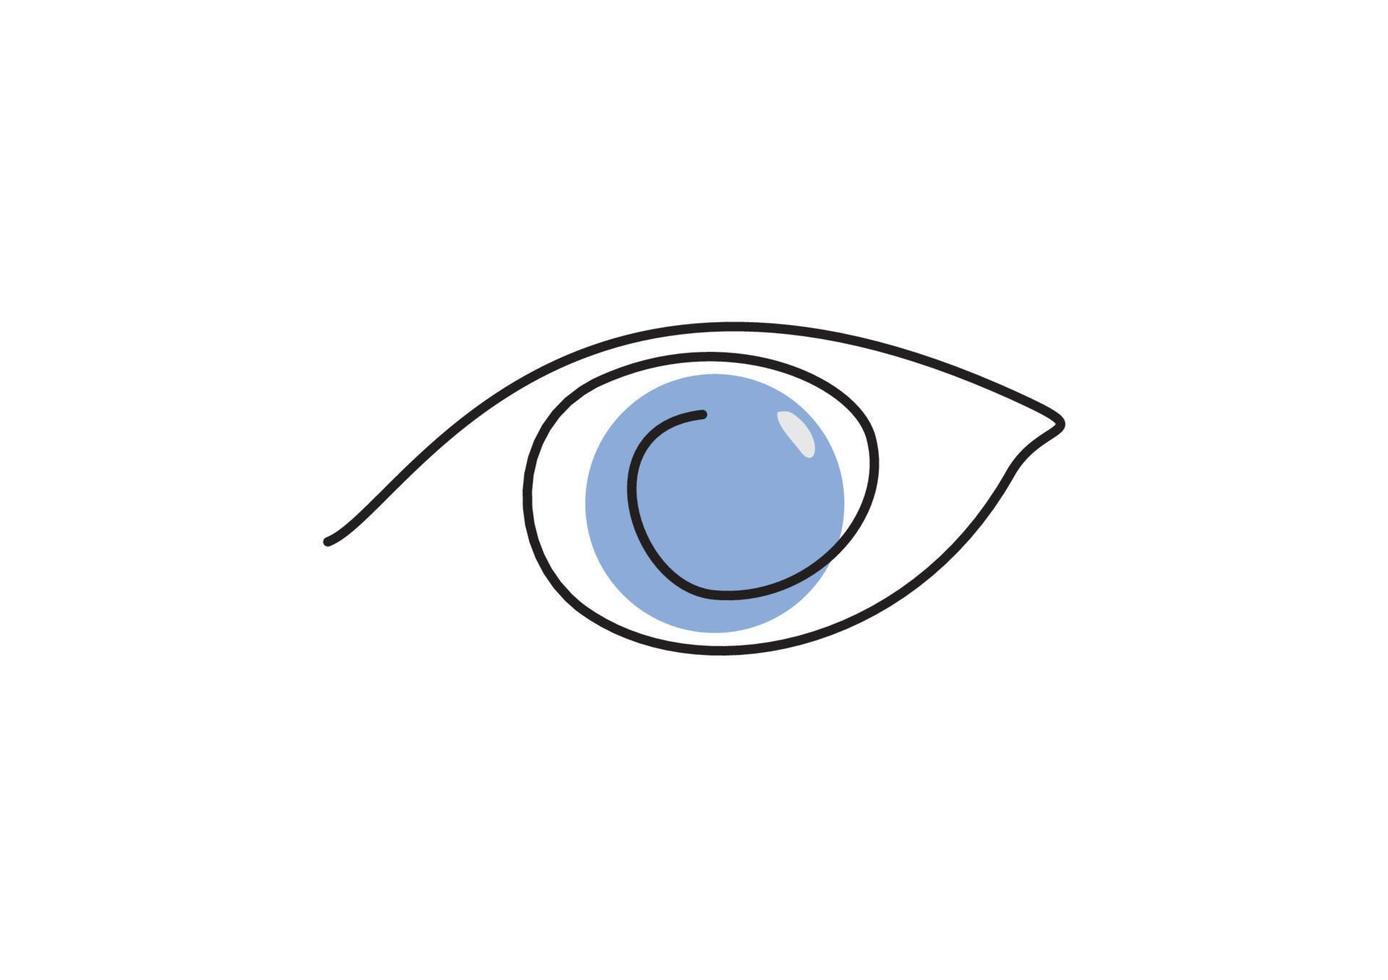 One line drawing of an eye, minimalism illustration vector